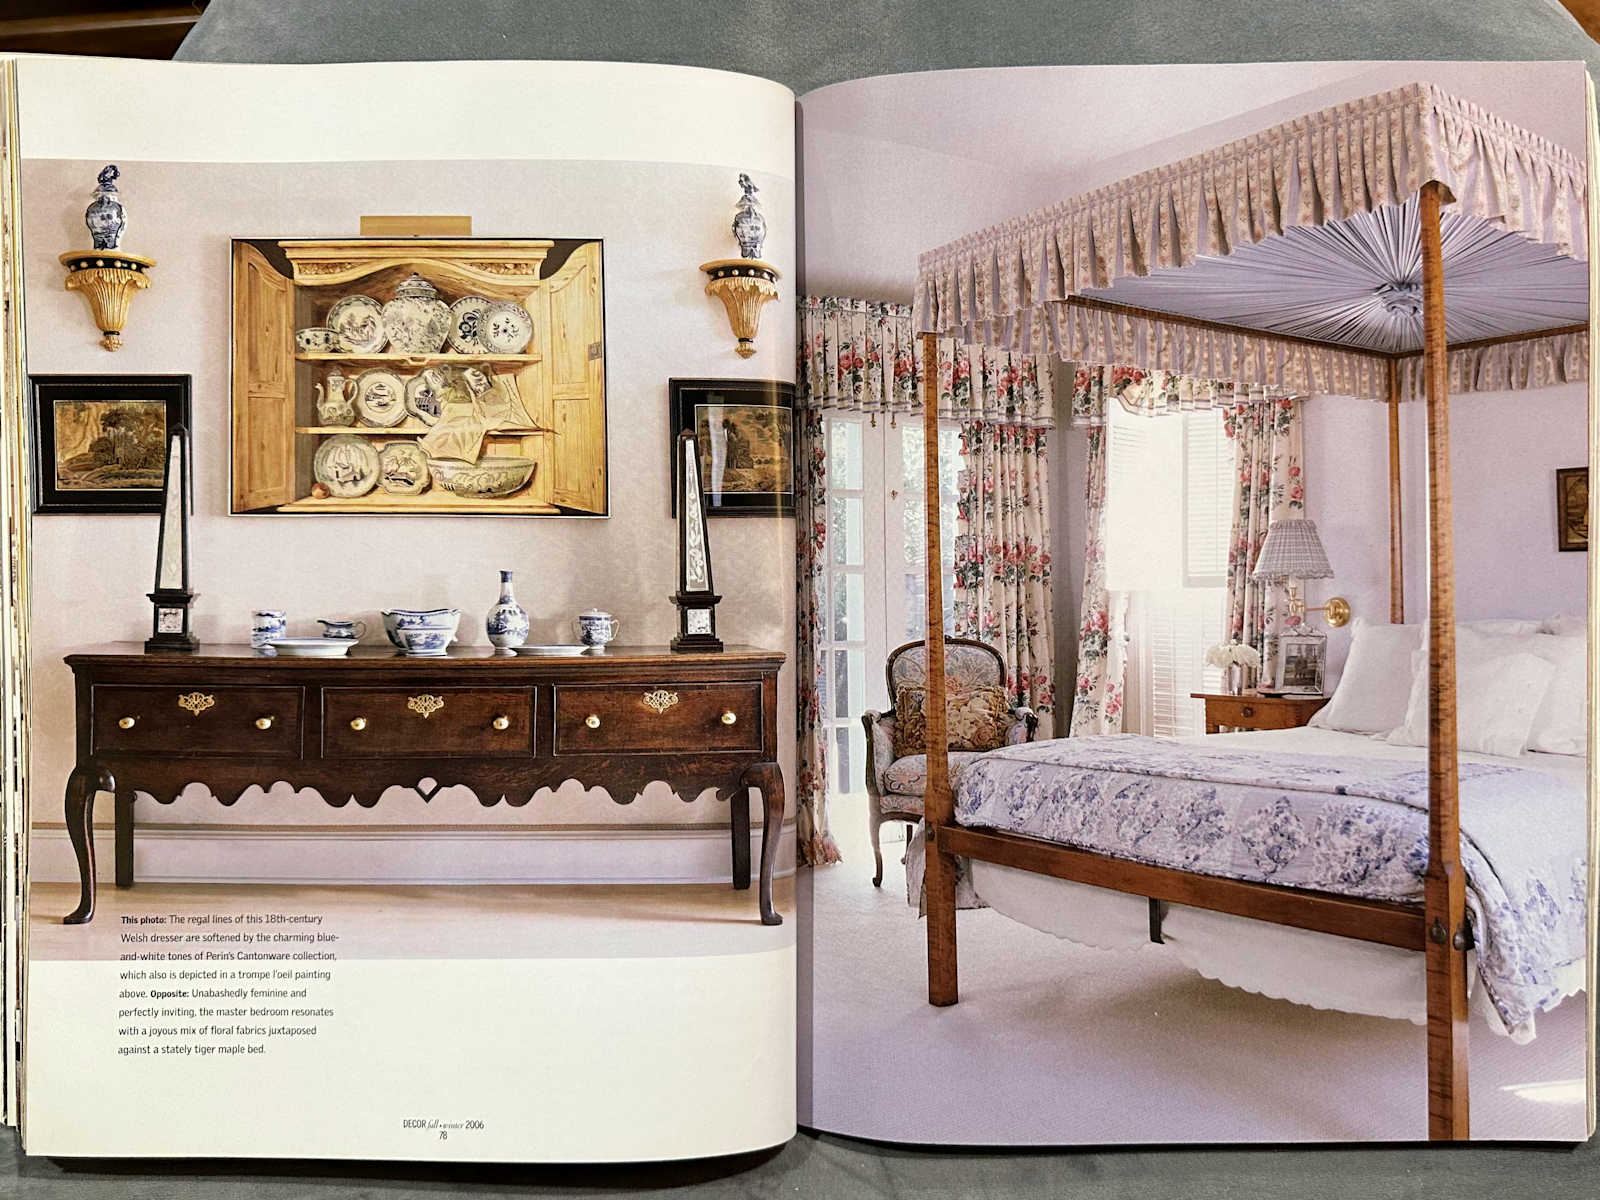 Traditional style bedroom with four poster bed with canopy, draperies with pleated valance, from 2006. 